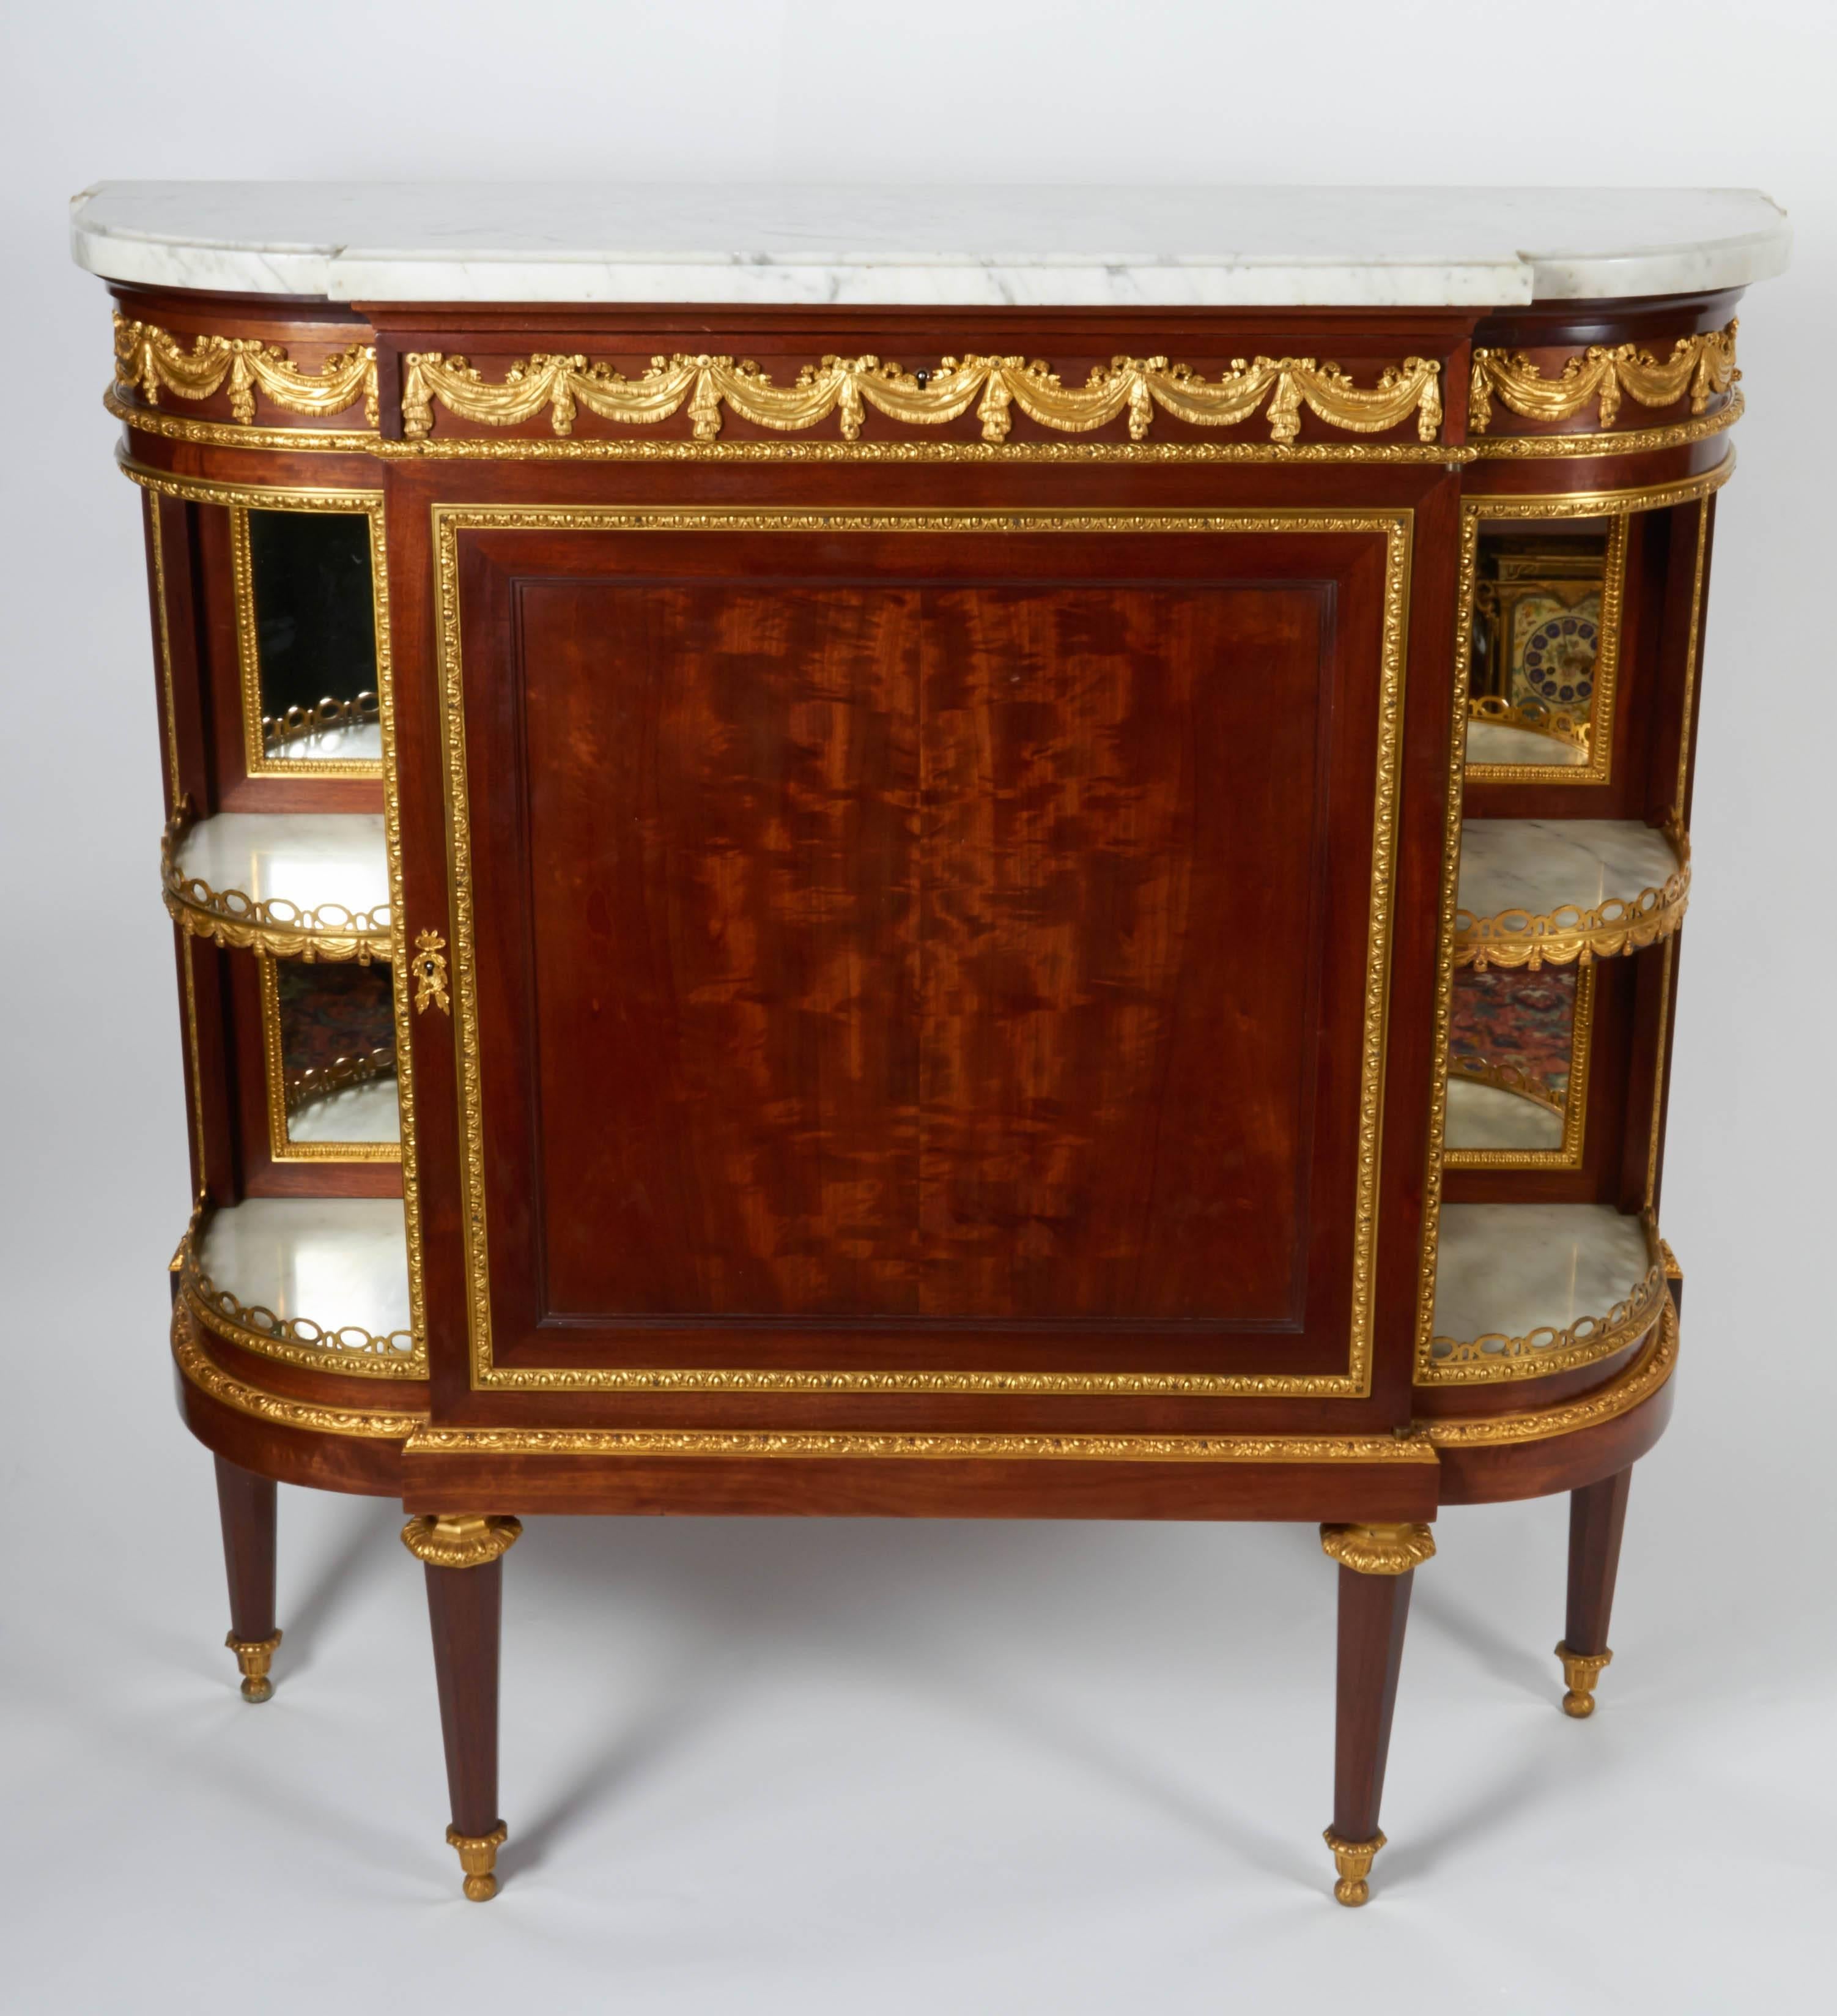 A fine pair of antique French Louis XVI style, ormolu-mounted mahogany side cabinets each having double sided, original beveled mirrored back display corners on either side. The ormolu all finely casted and hand chiseled with original mercury